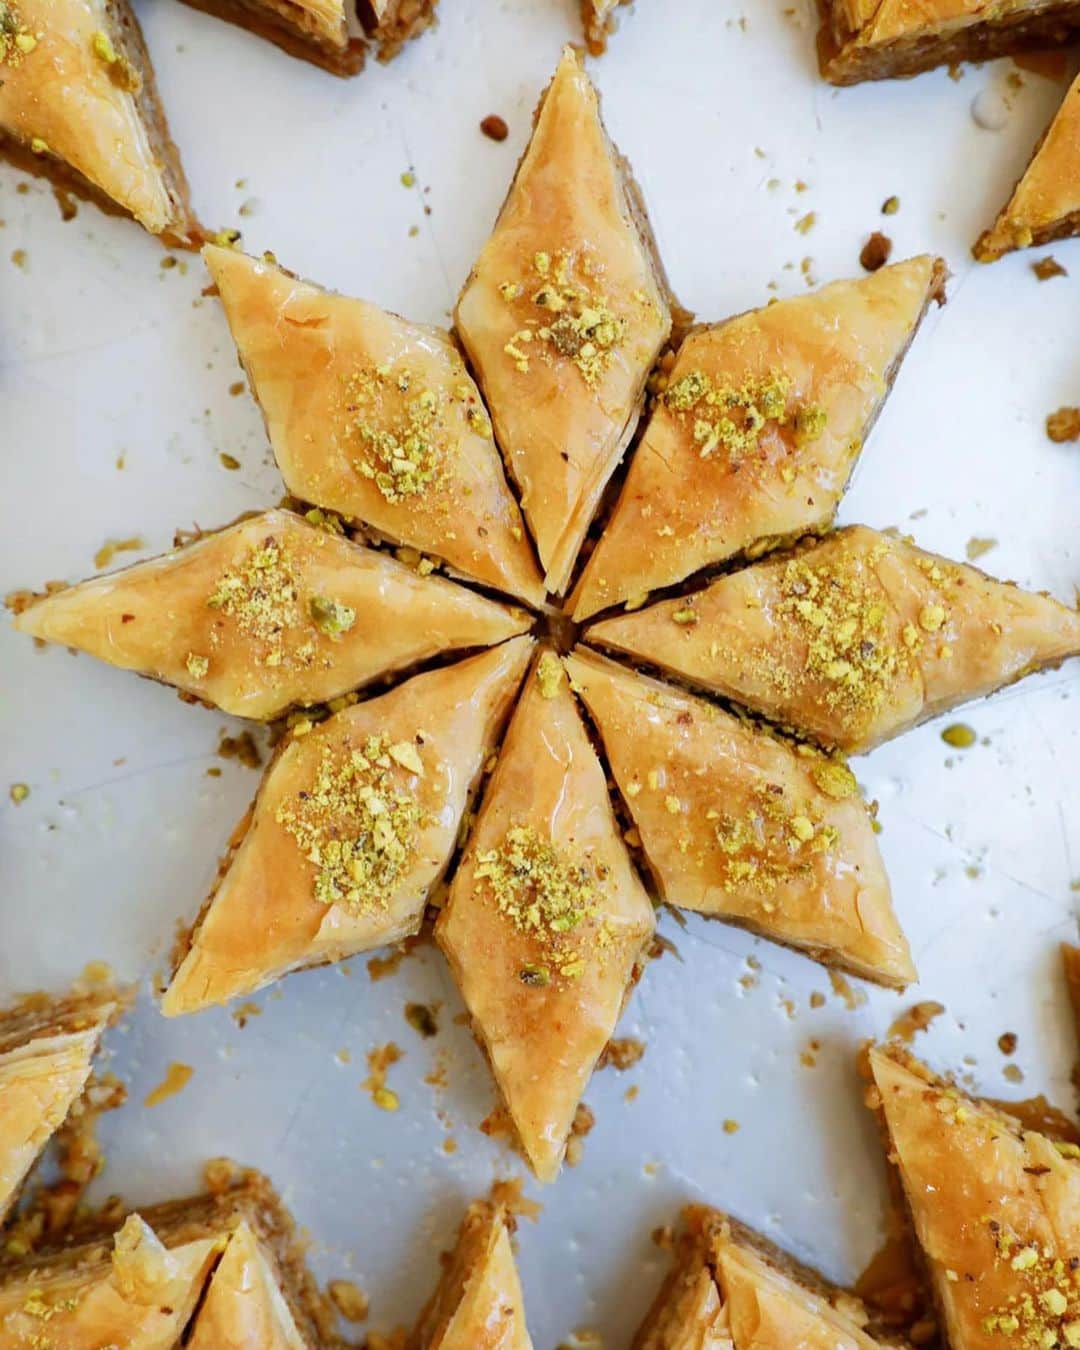 Easy Recipesのインスタグラム：「This amazing Walnut Baklava recipe comes together with layers and layers of flaky phyllo dough that’s filled with 3 layers of ground walnuts and showered with love with the most delicious aromatic simple syrup.  Step-by-step recipe via the link in my bio @cookinwithmima  https://www.cookinwithmima.com/walnut-baklava/」